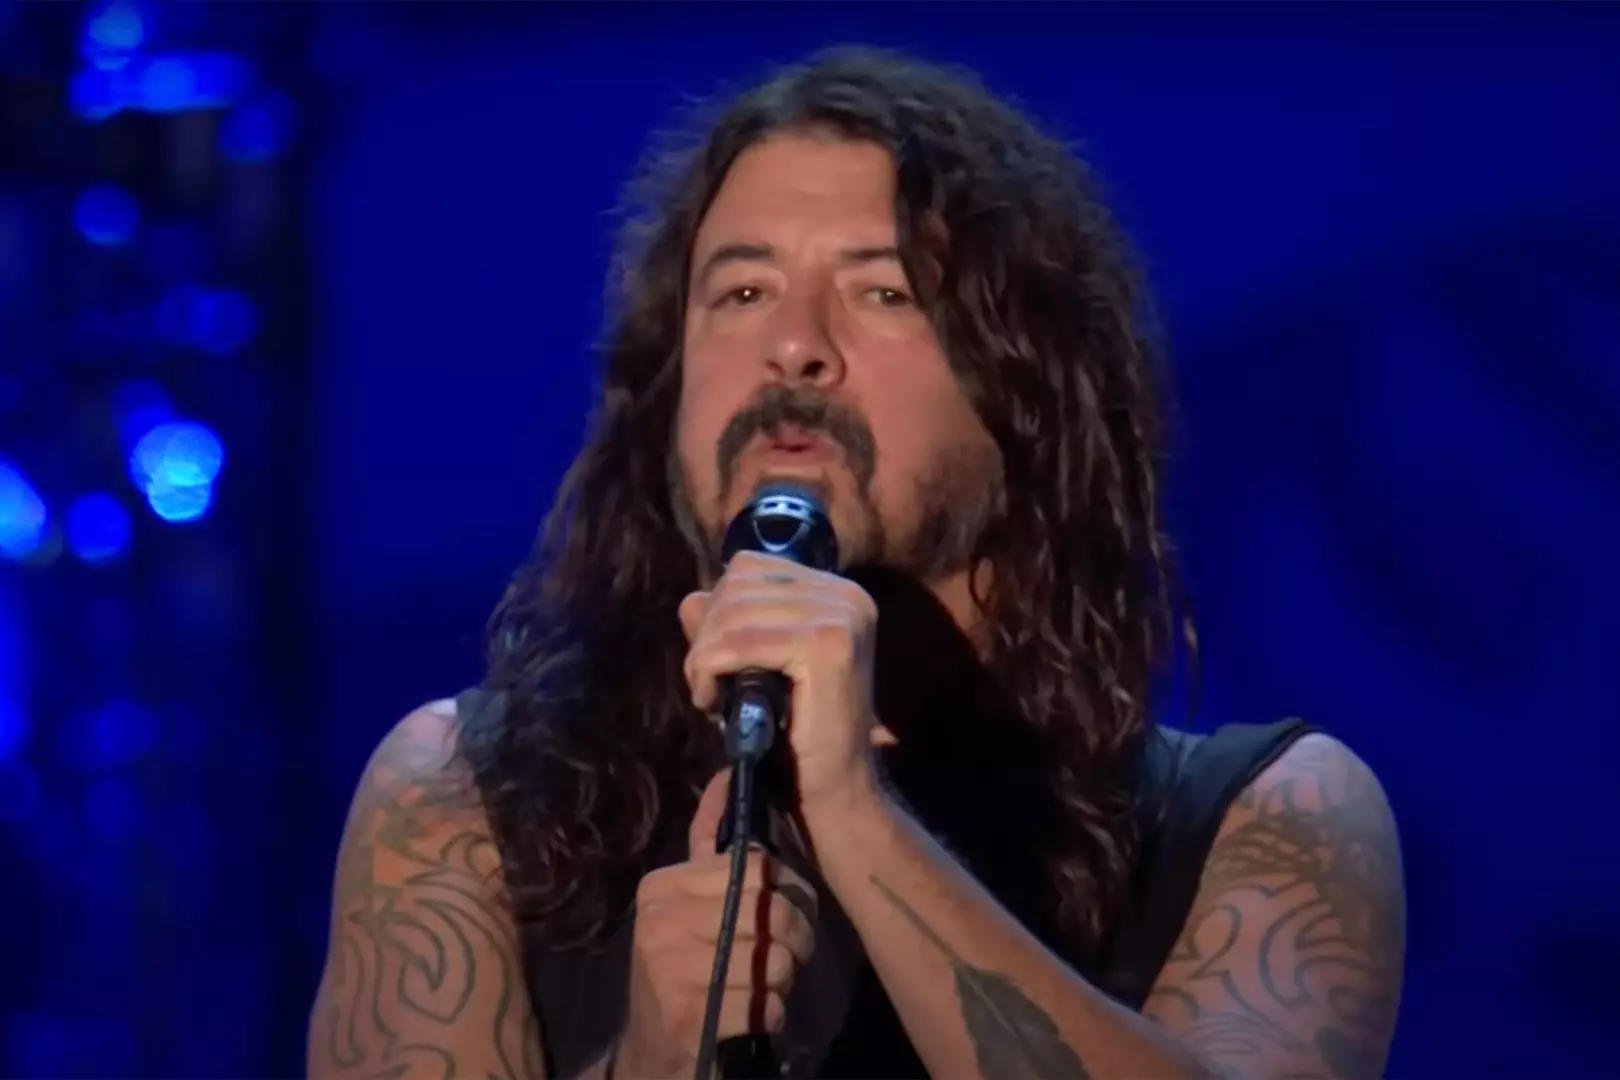 foo fighters, dave grohl, taylor hawkins tribute concert